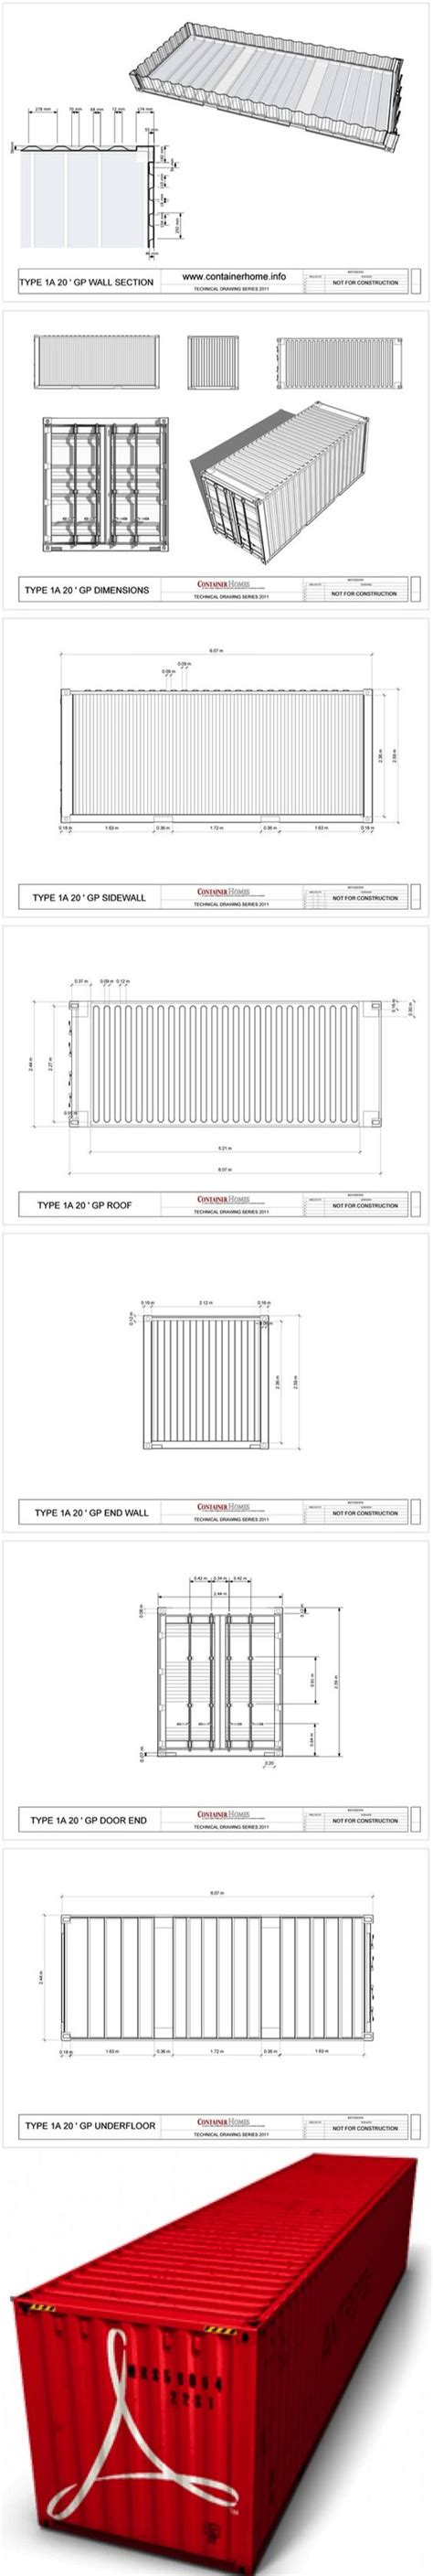 Free Shipping Container Technical Drawing Package Inside